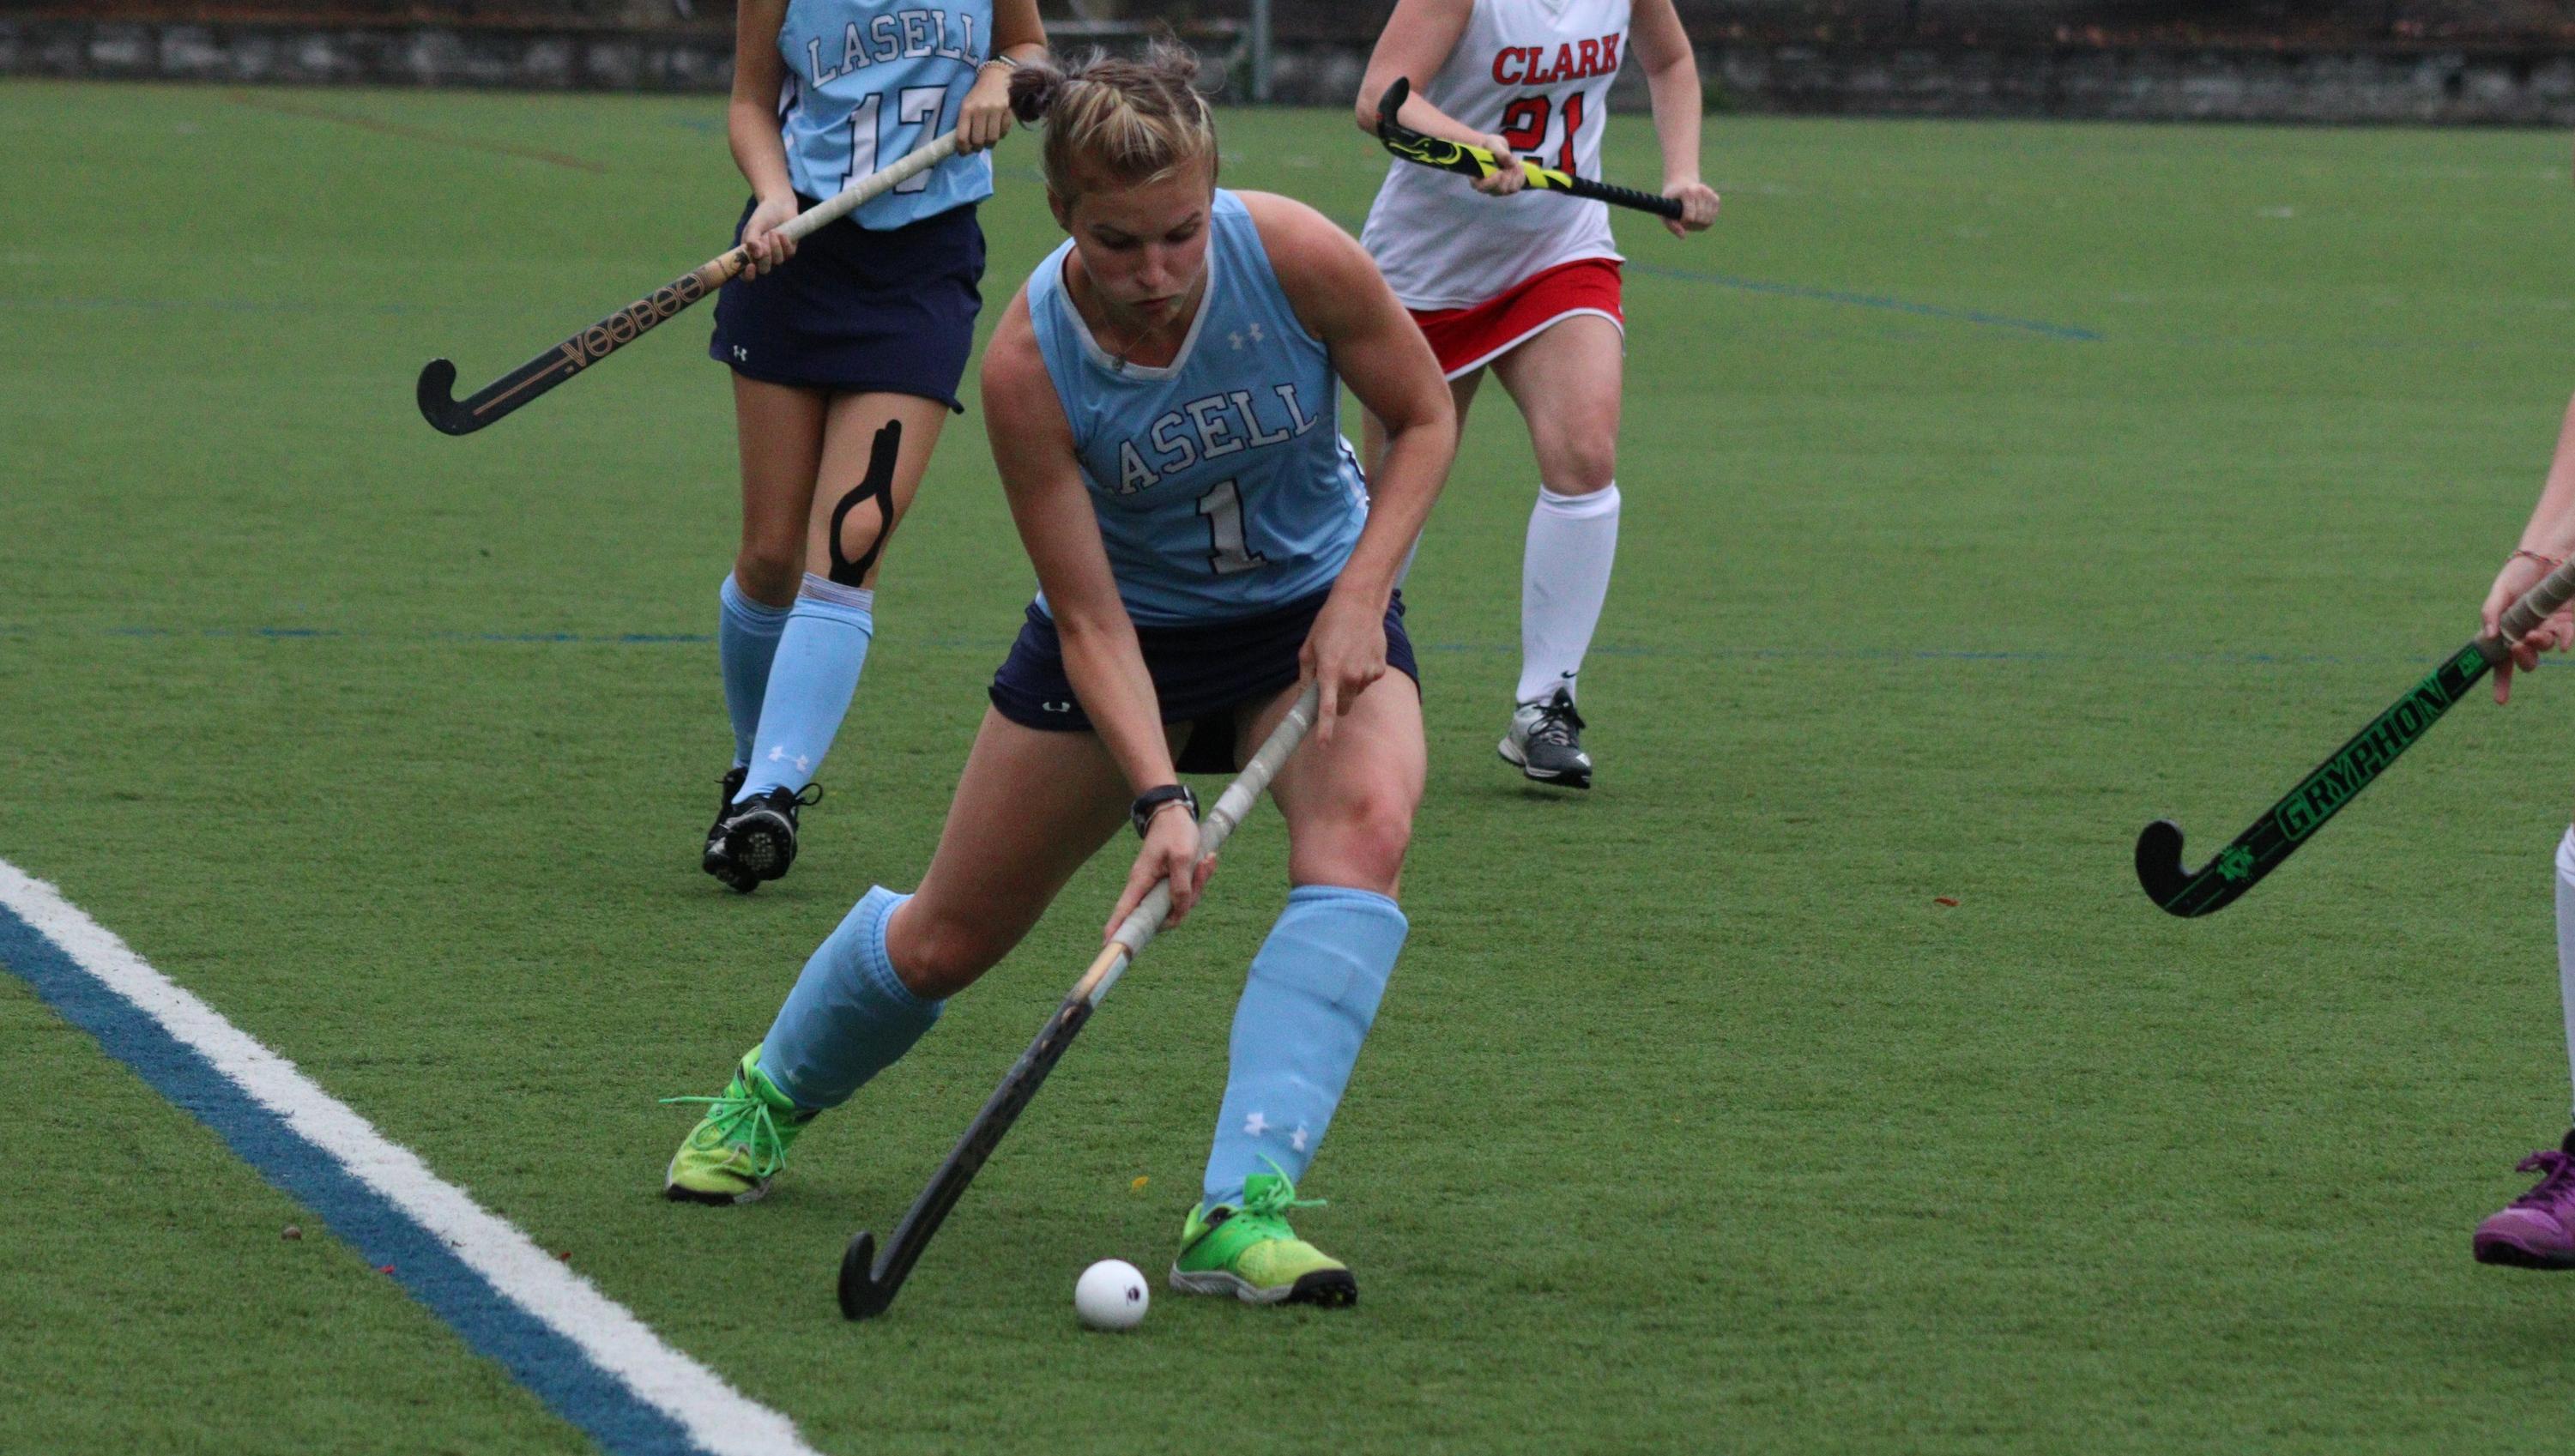 Lasell Field Hockey powers past Becker for first win of season